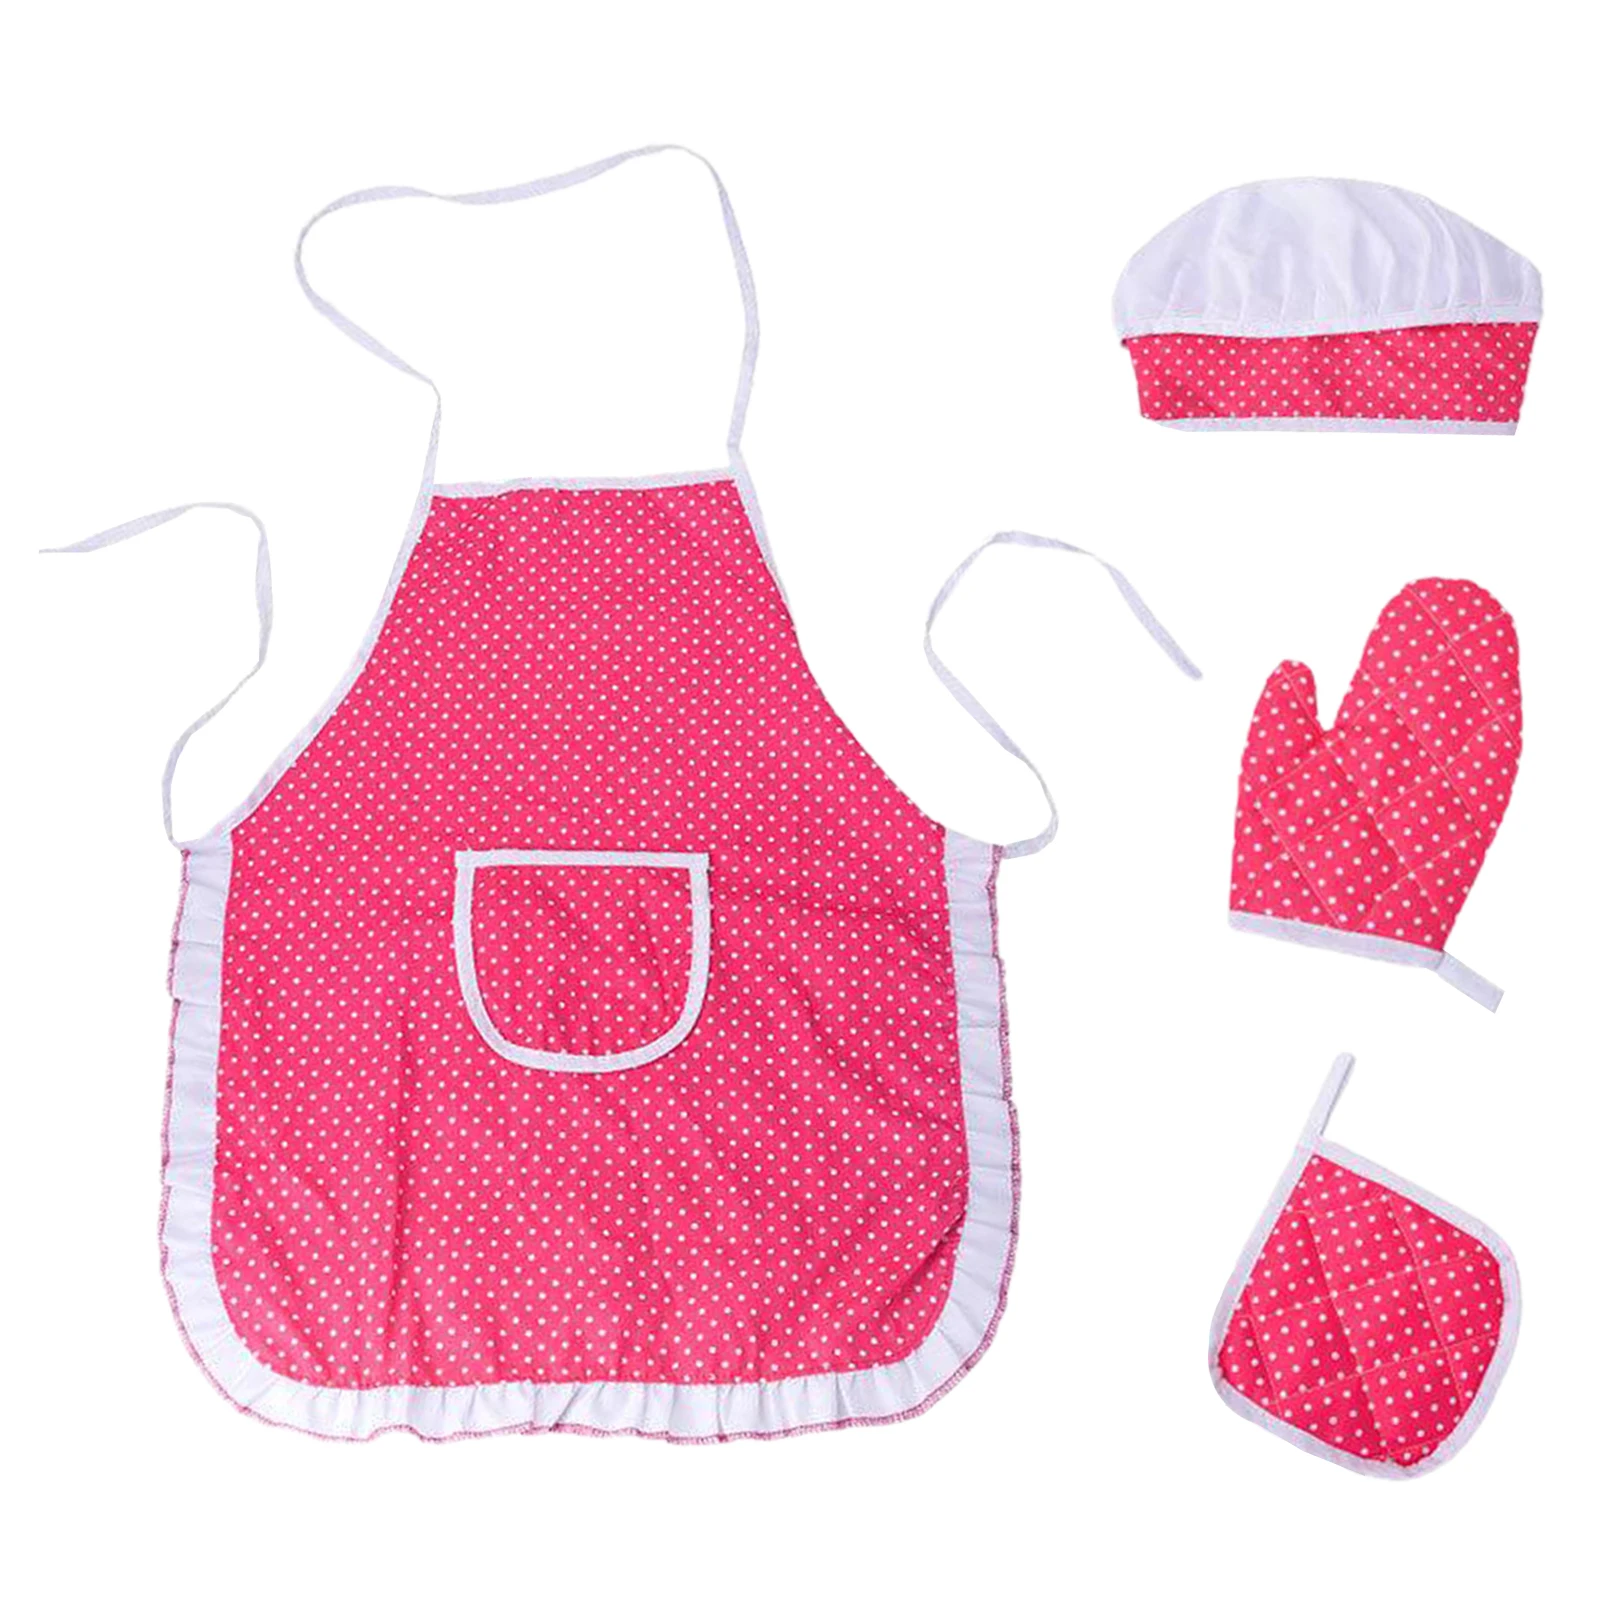 Chef Set for Kids,4Pcs Cooking Set for Boys Girls Toddler Role Play Cook Costume with Apron, Chef Hat, Oven Mitt ,Hot Pad